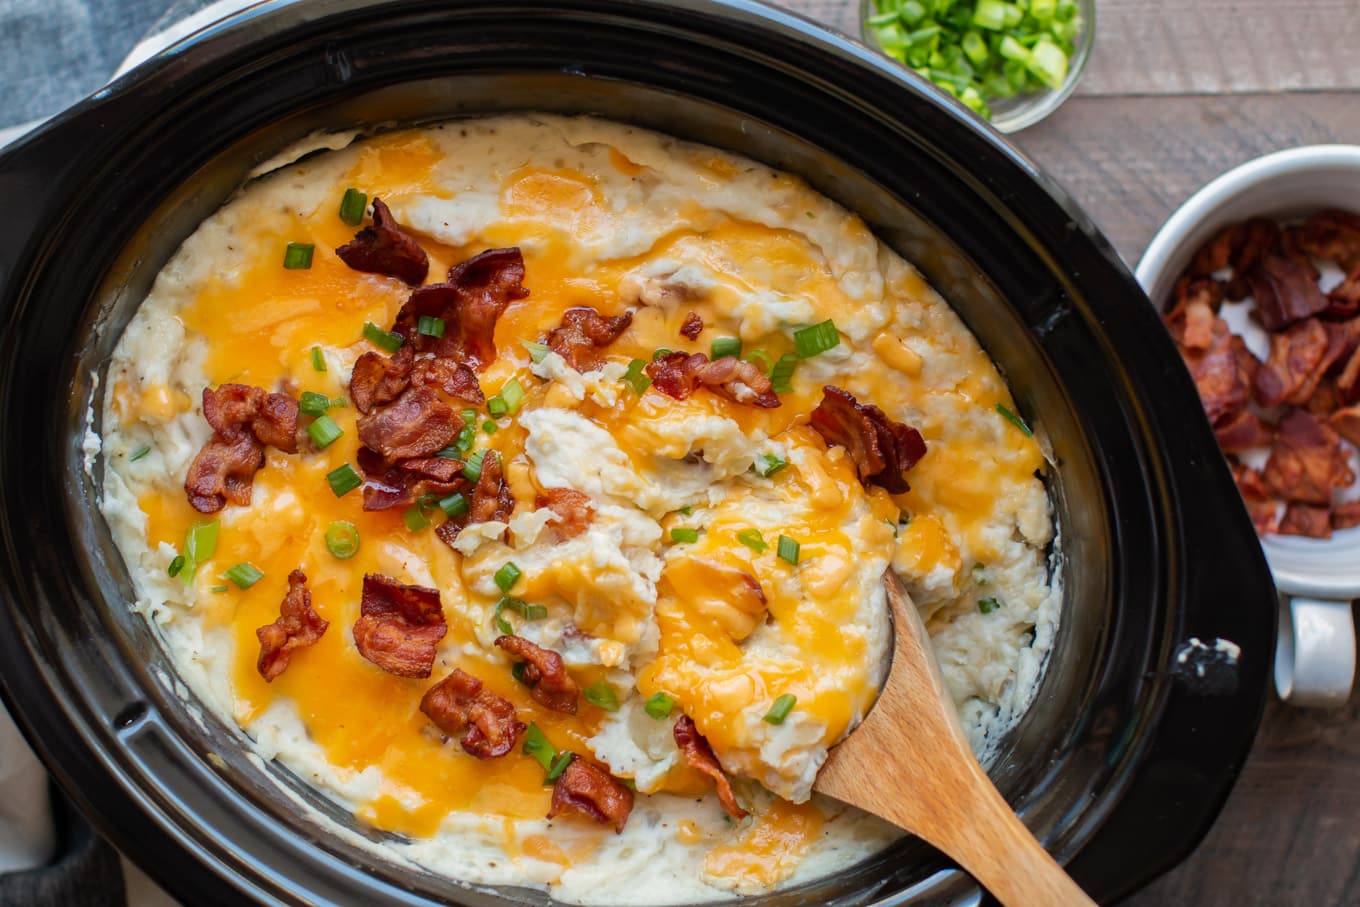 baked potato casserole with wooden spoon in it.